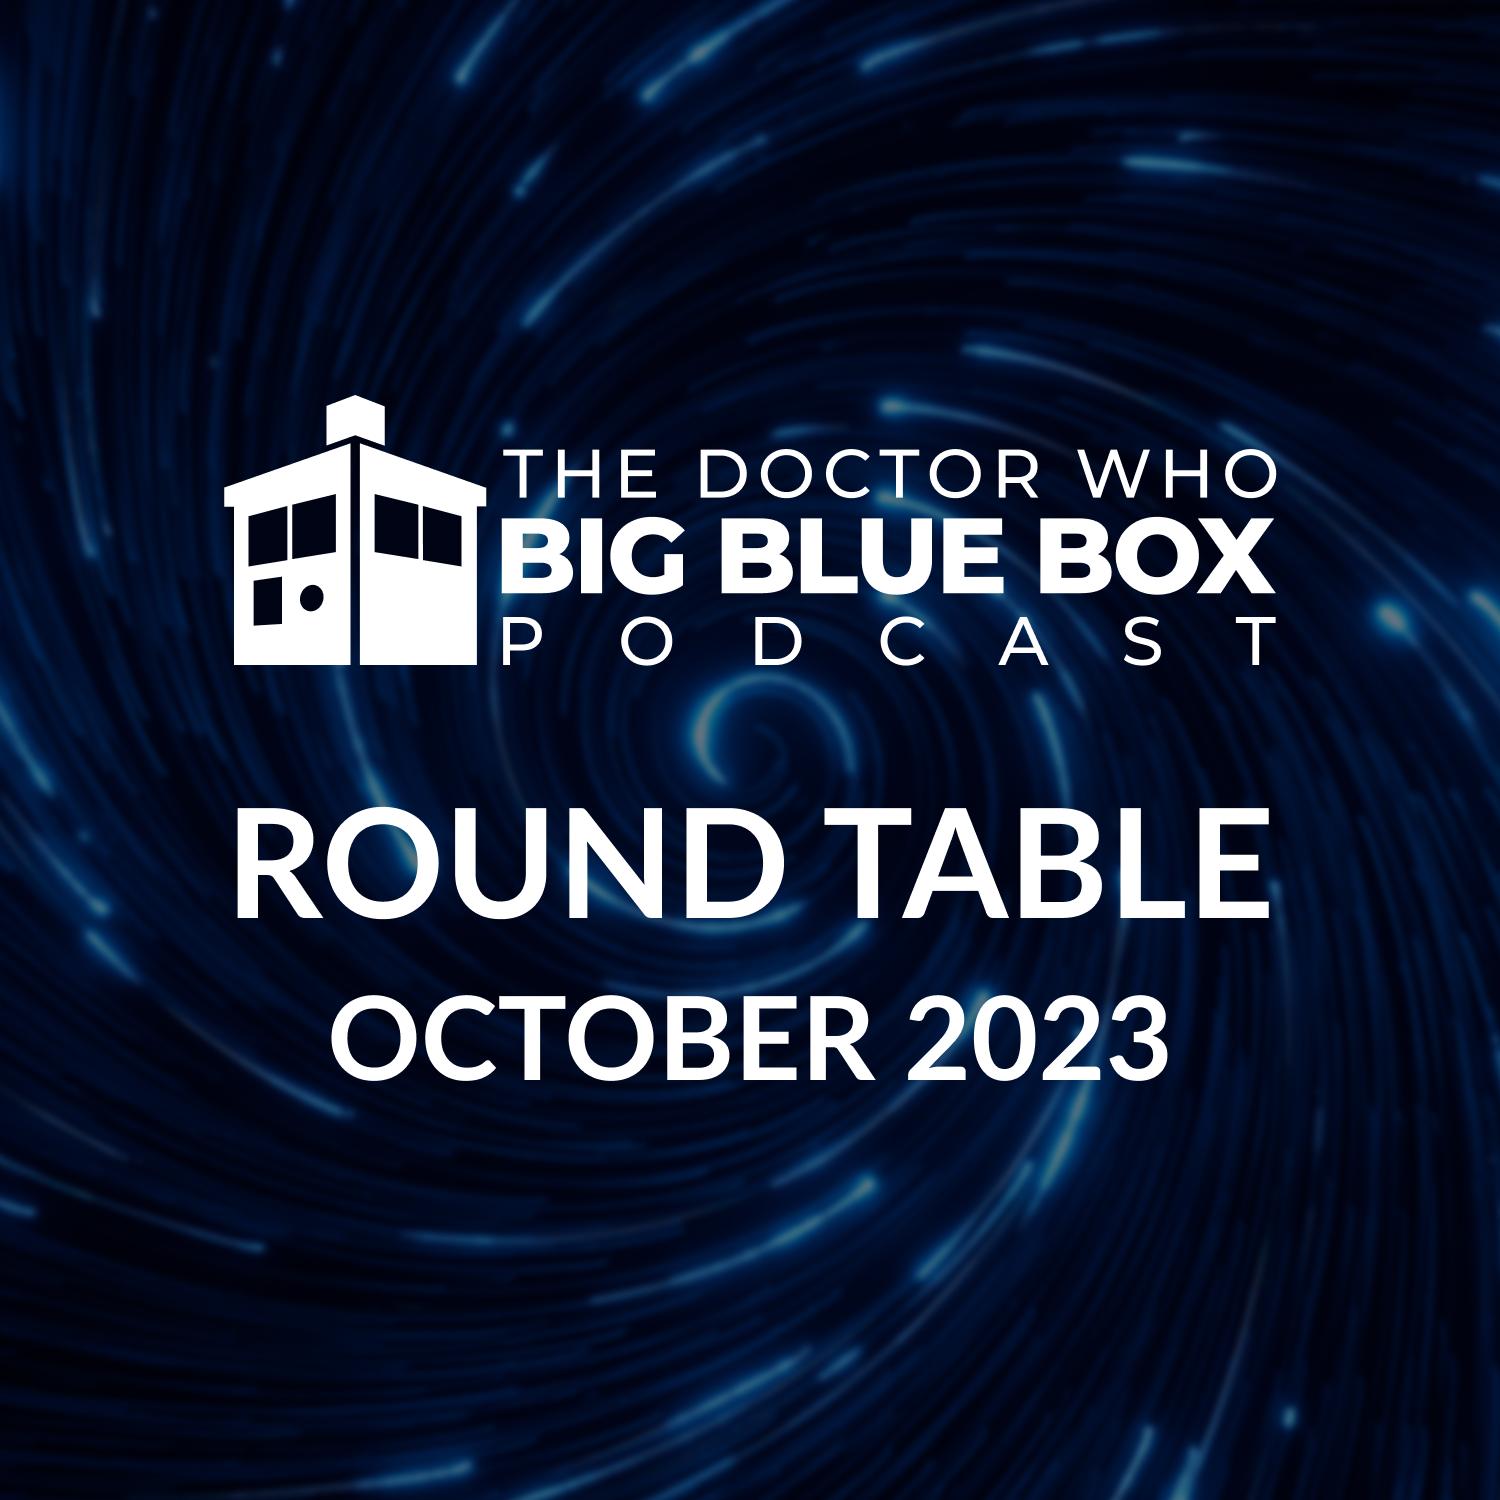 Round Table - October 2023